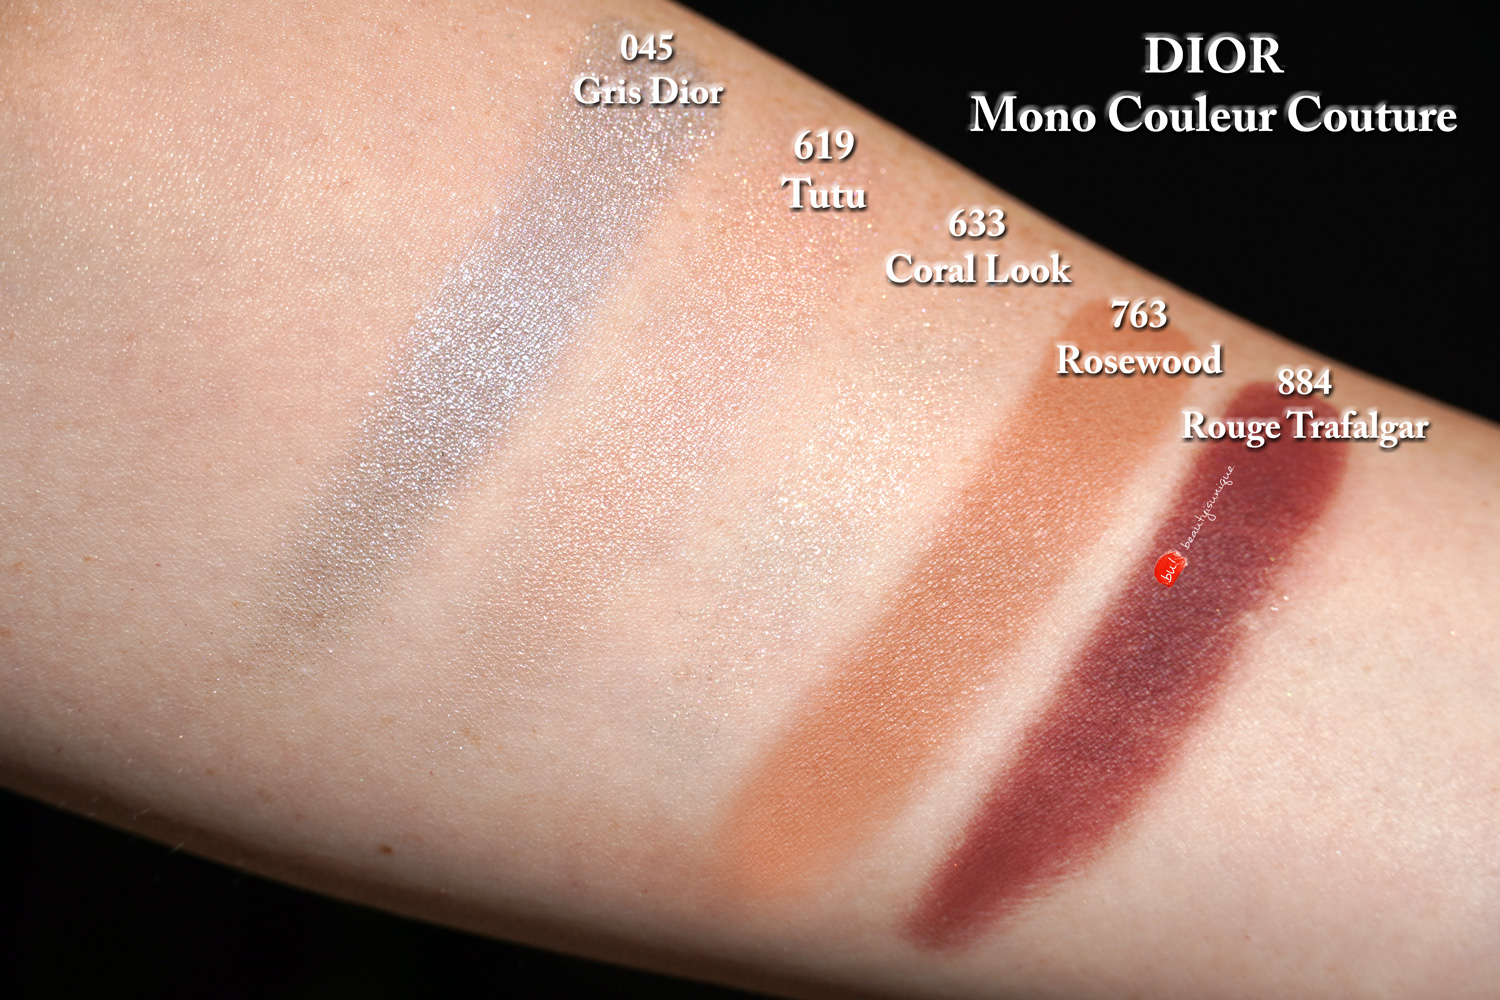 Dior-mono-couleur-couture-swatches